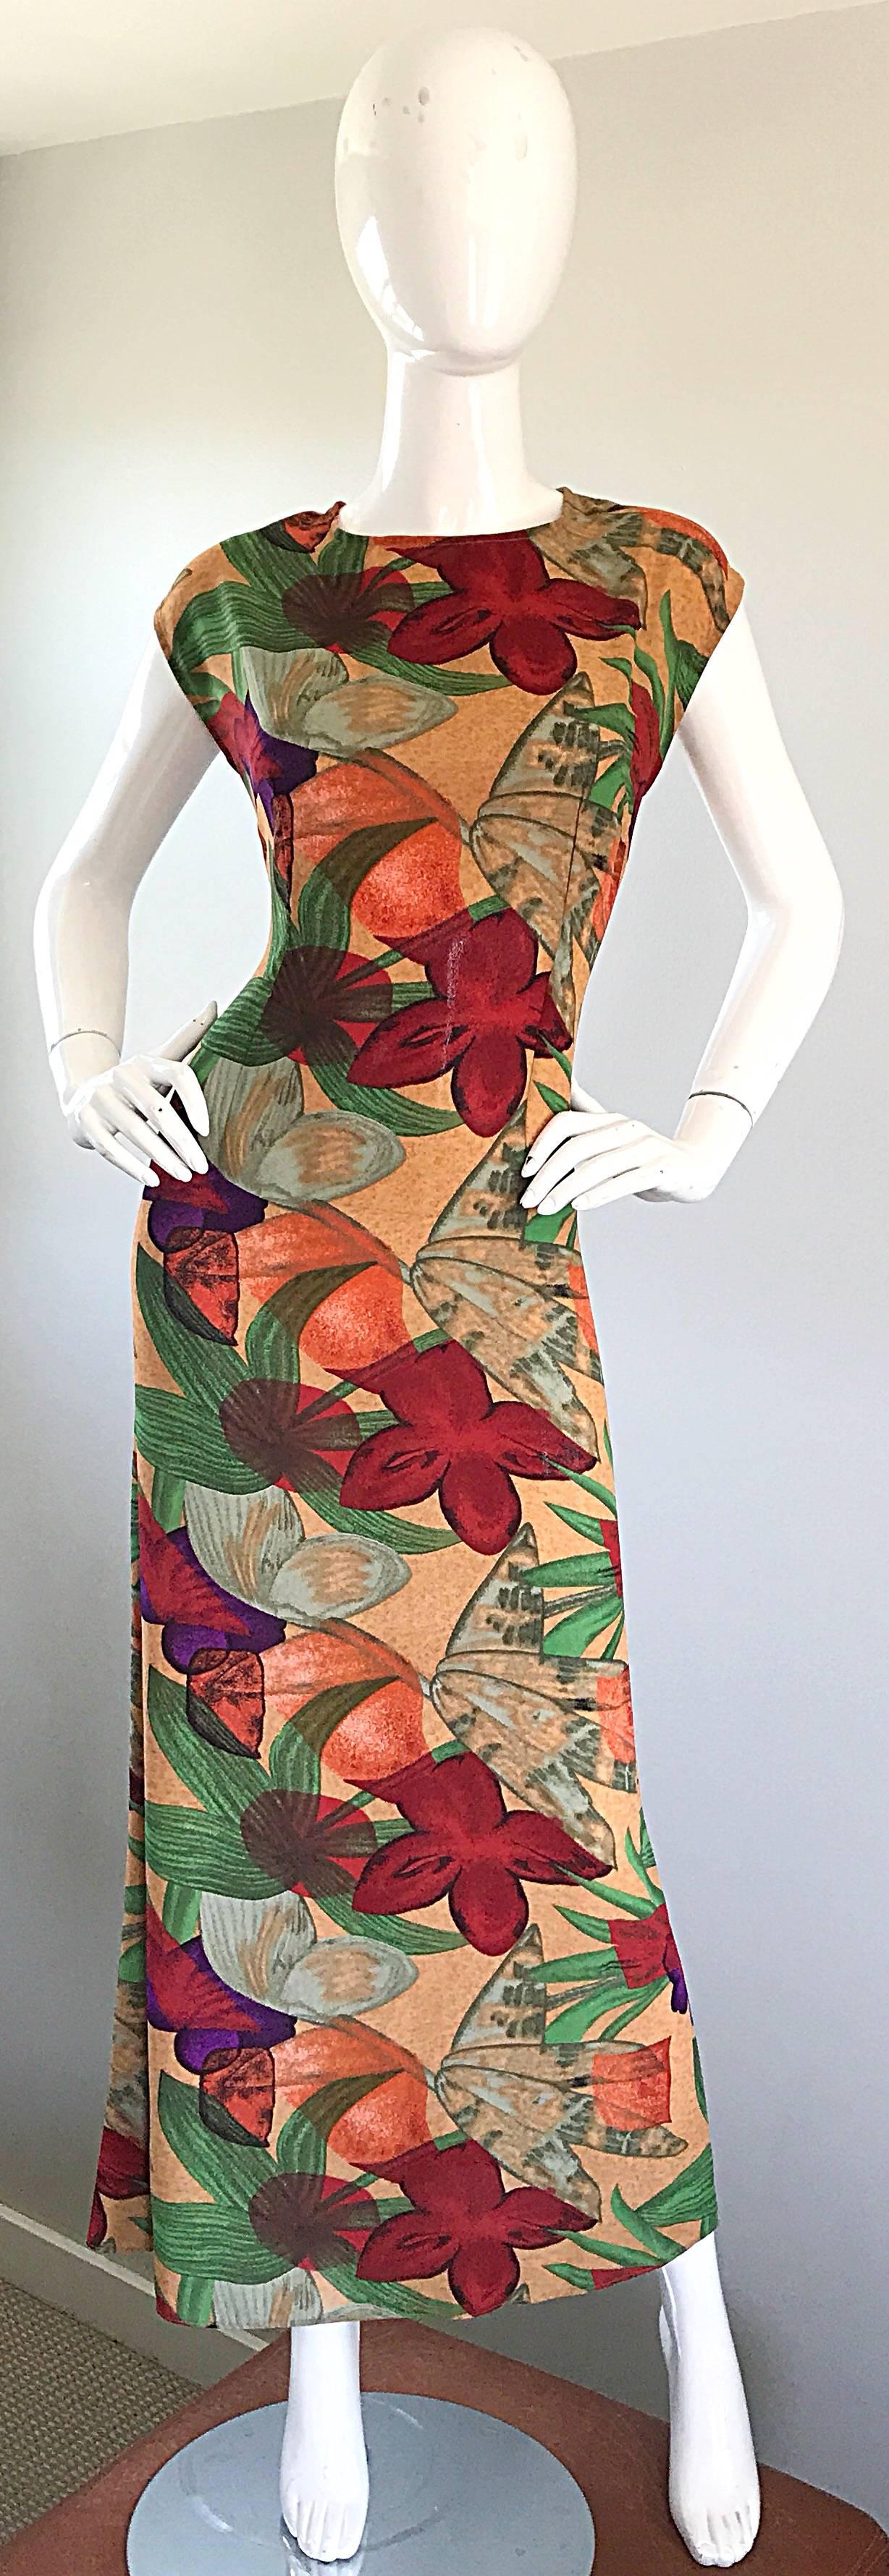 Gorgeous vintage HALSTON vibrant colored Hawaiian / Tropical print maxi dress! Features a terracotta backdrop with brightly colored abstract flowers in purple, red, orange, sorbet, green, and tan throughout. Flattering fitted bodice with a full